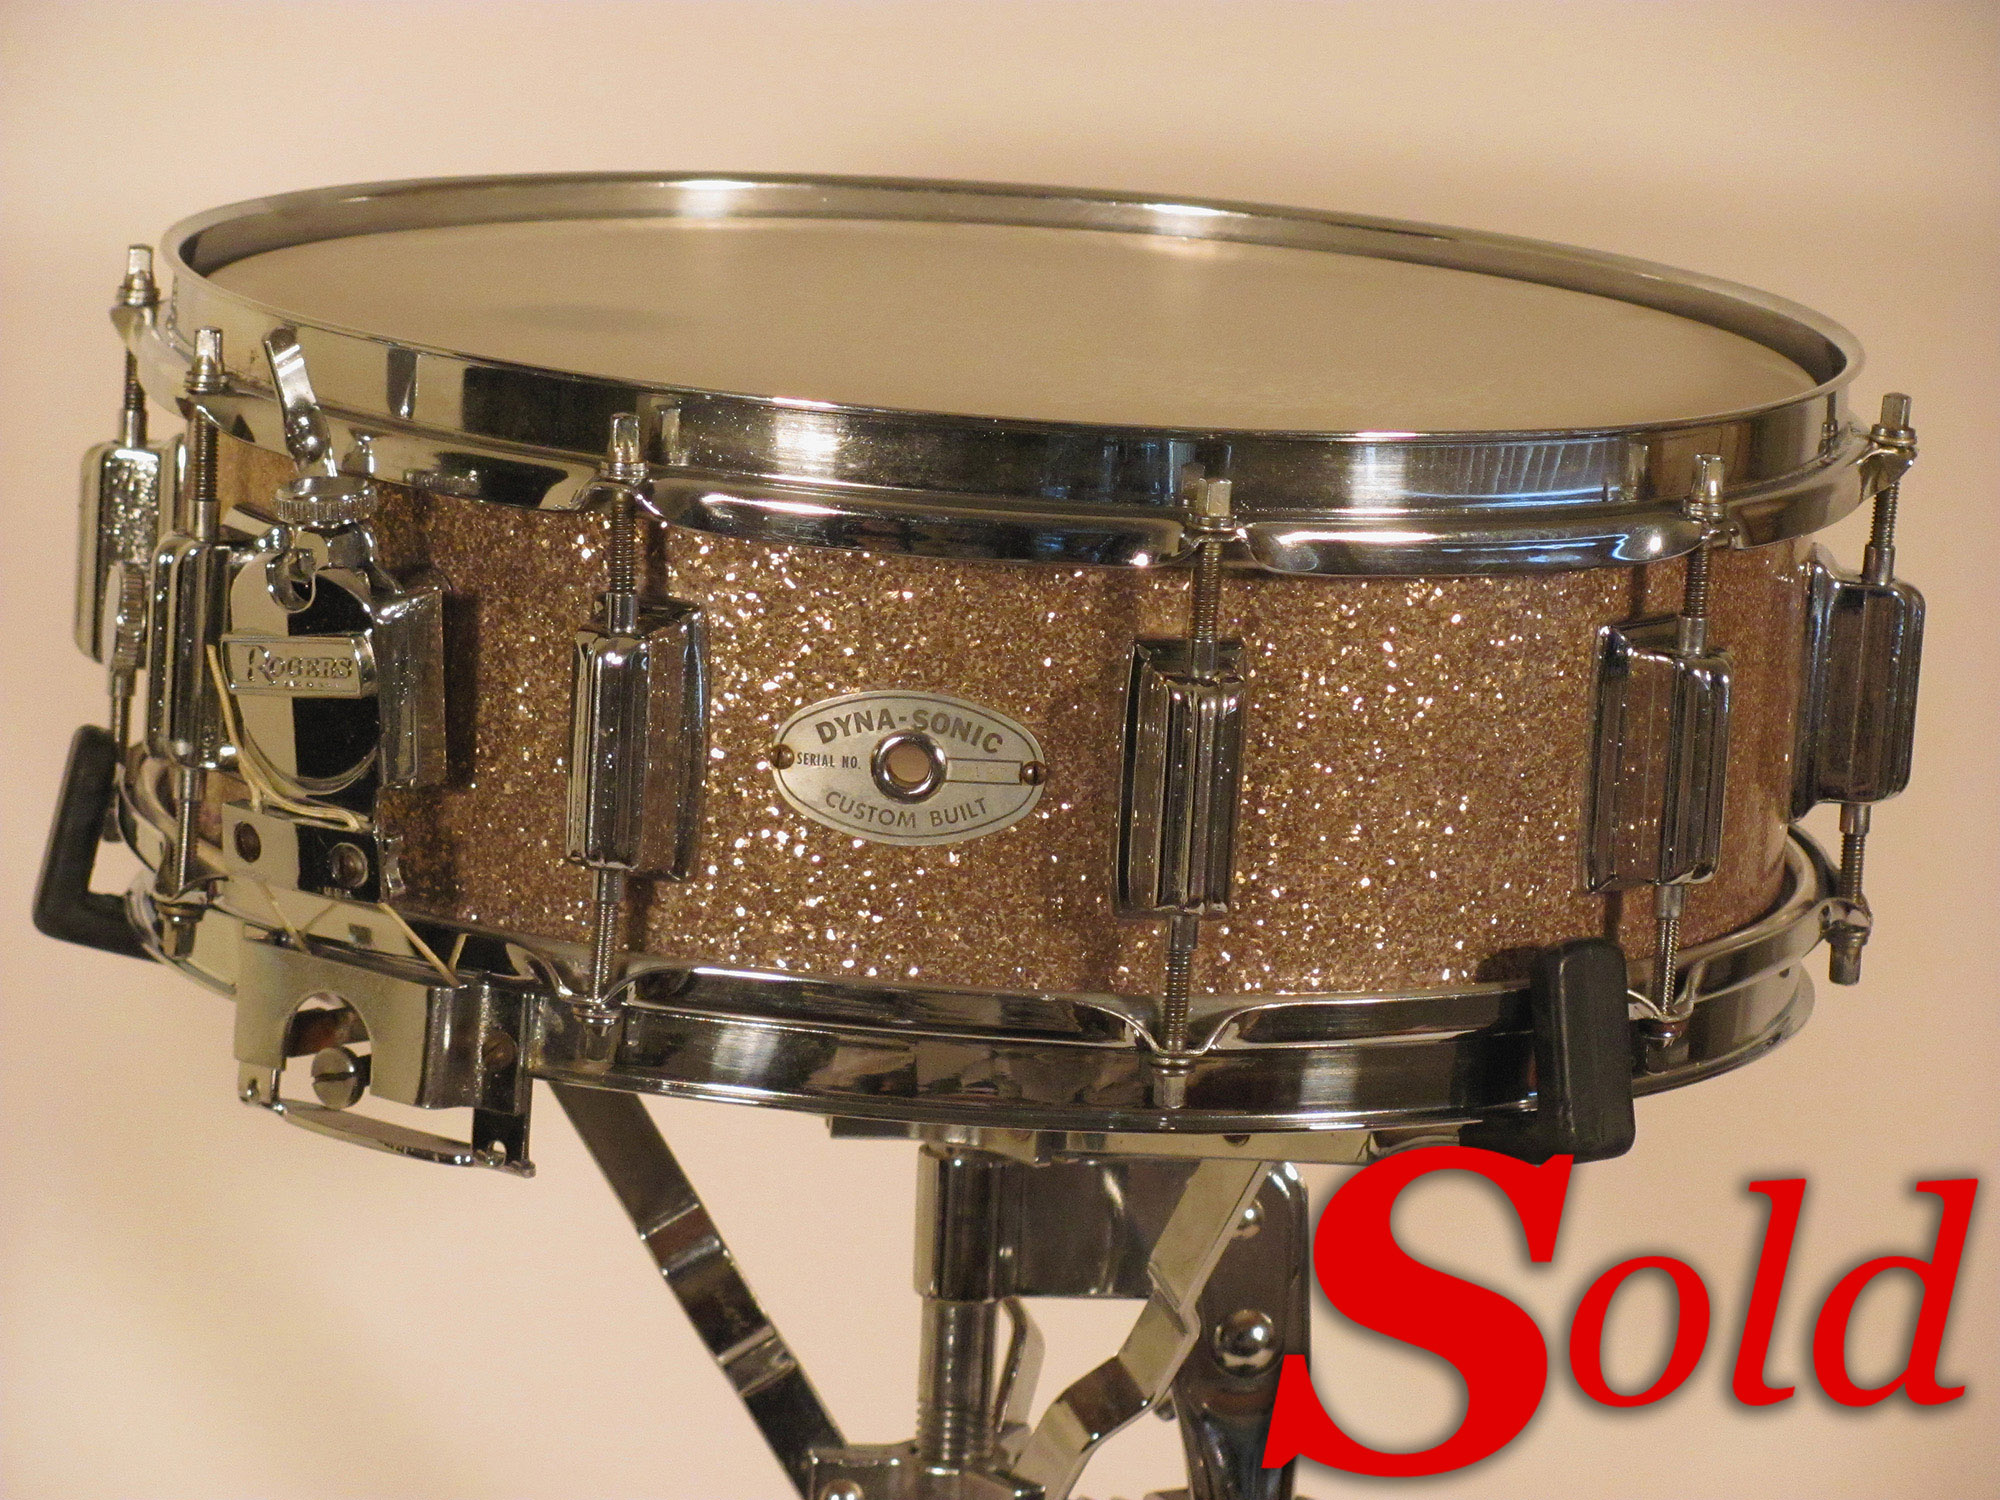 Rogers Dynasonic Snare Serial Number